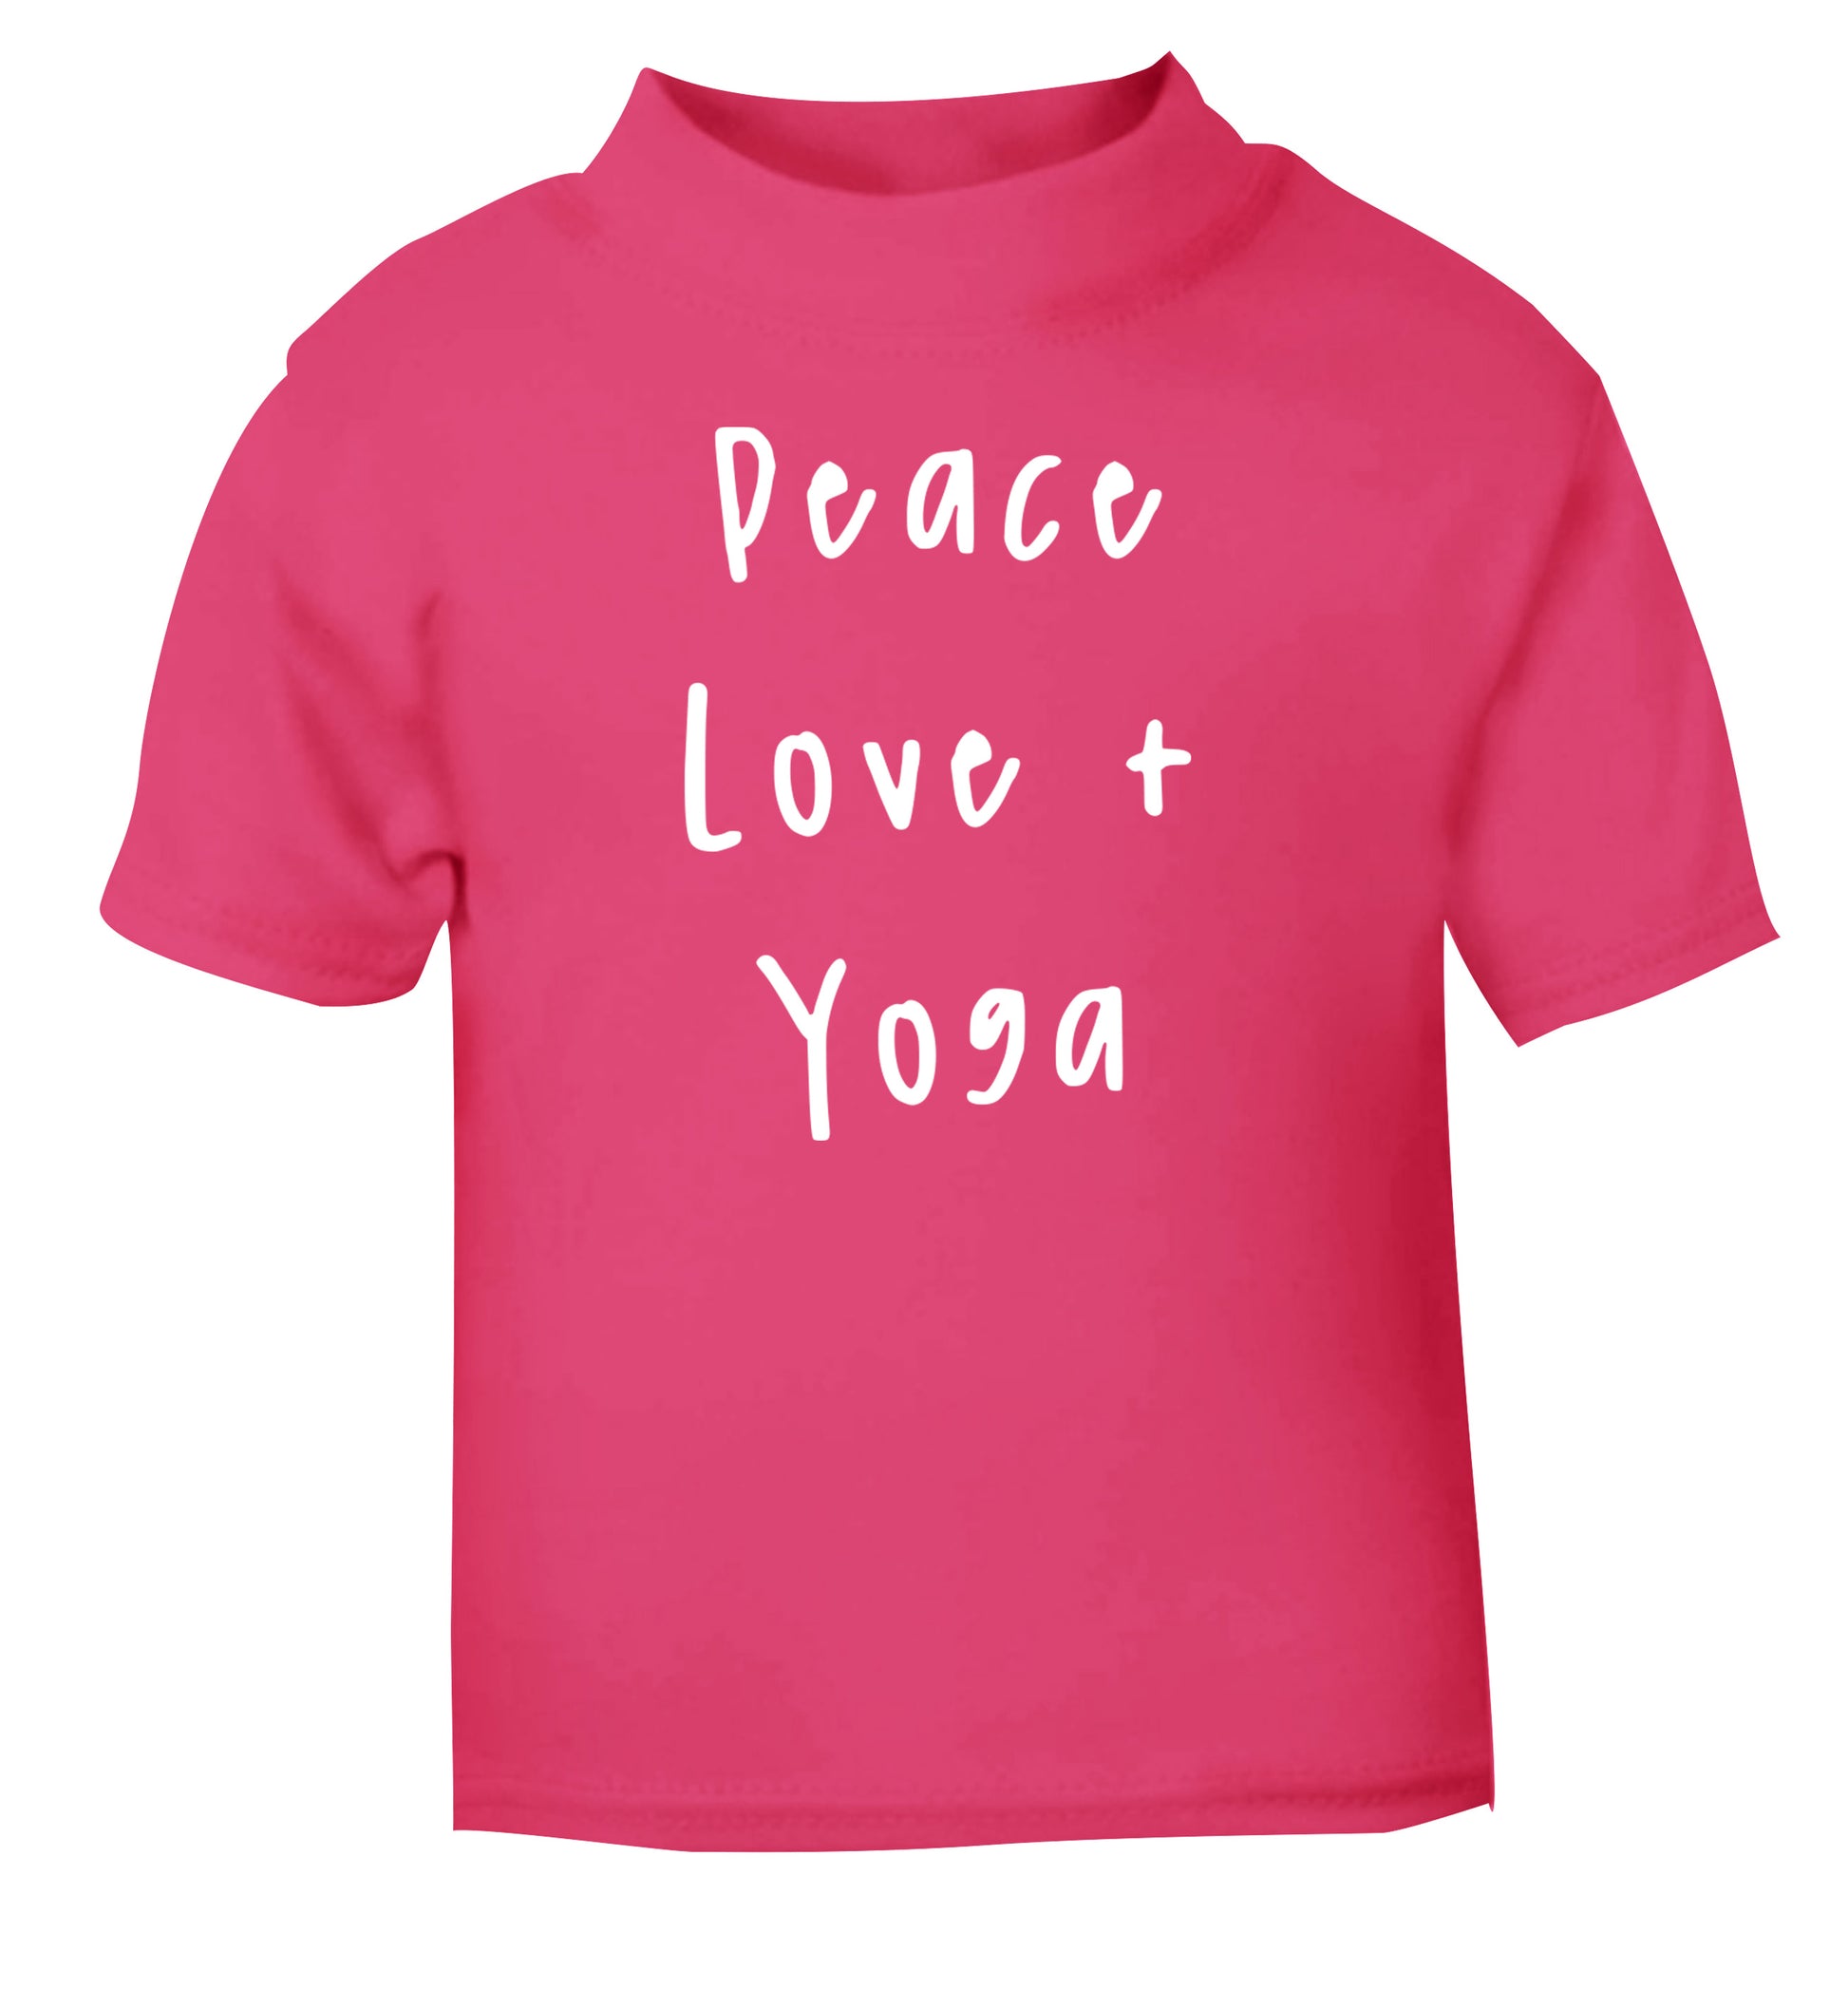 Peace love and yoga pink Baby Toddler Tshirt 2 Years